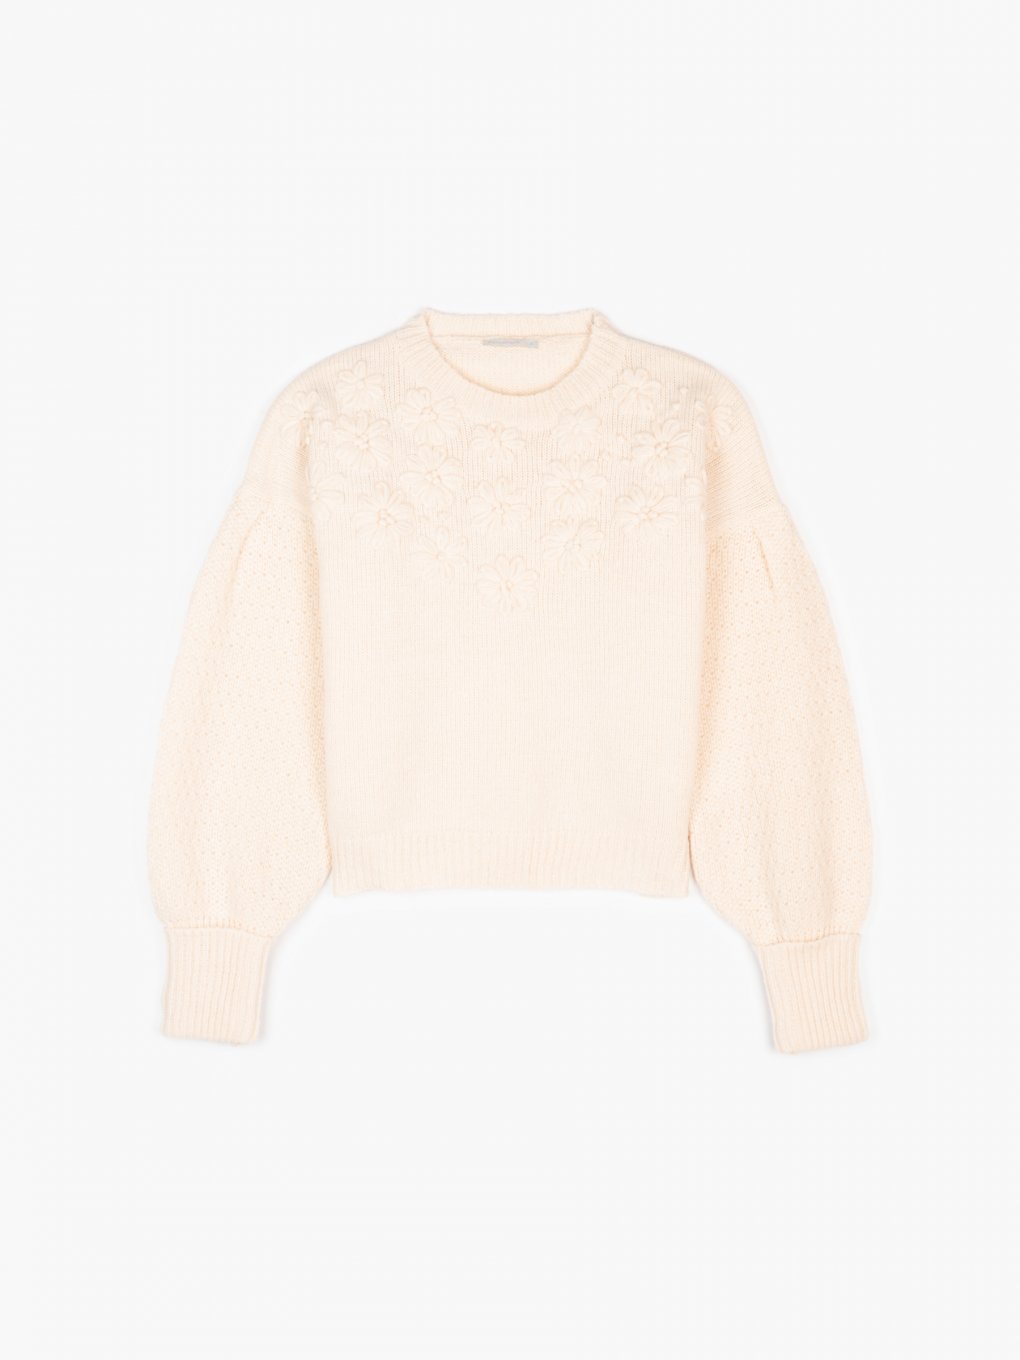 Embroidered round neck sweater